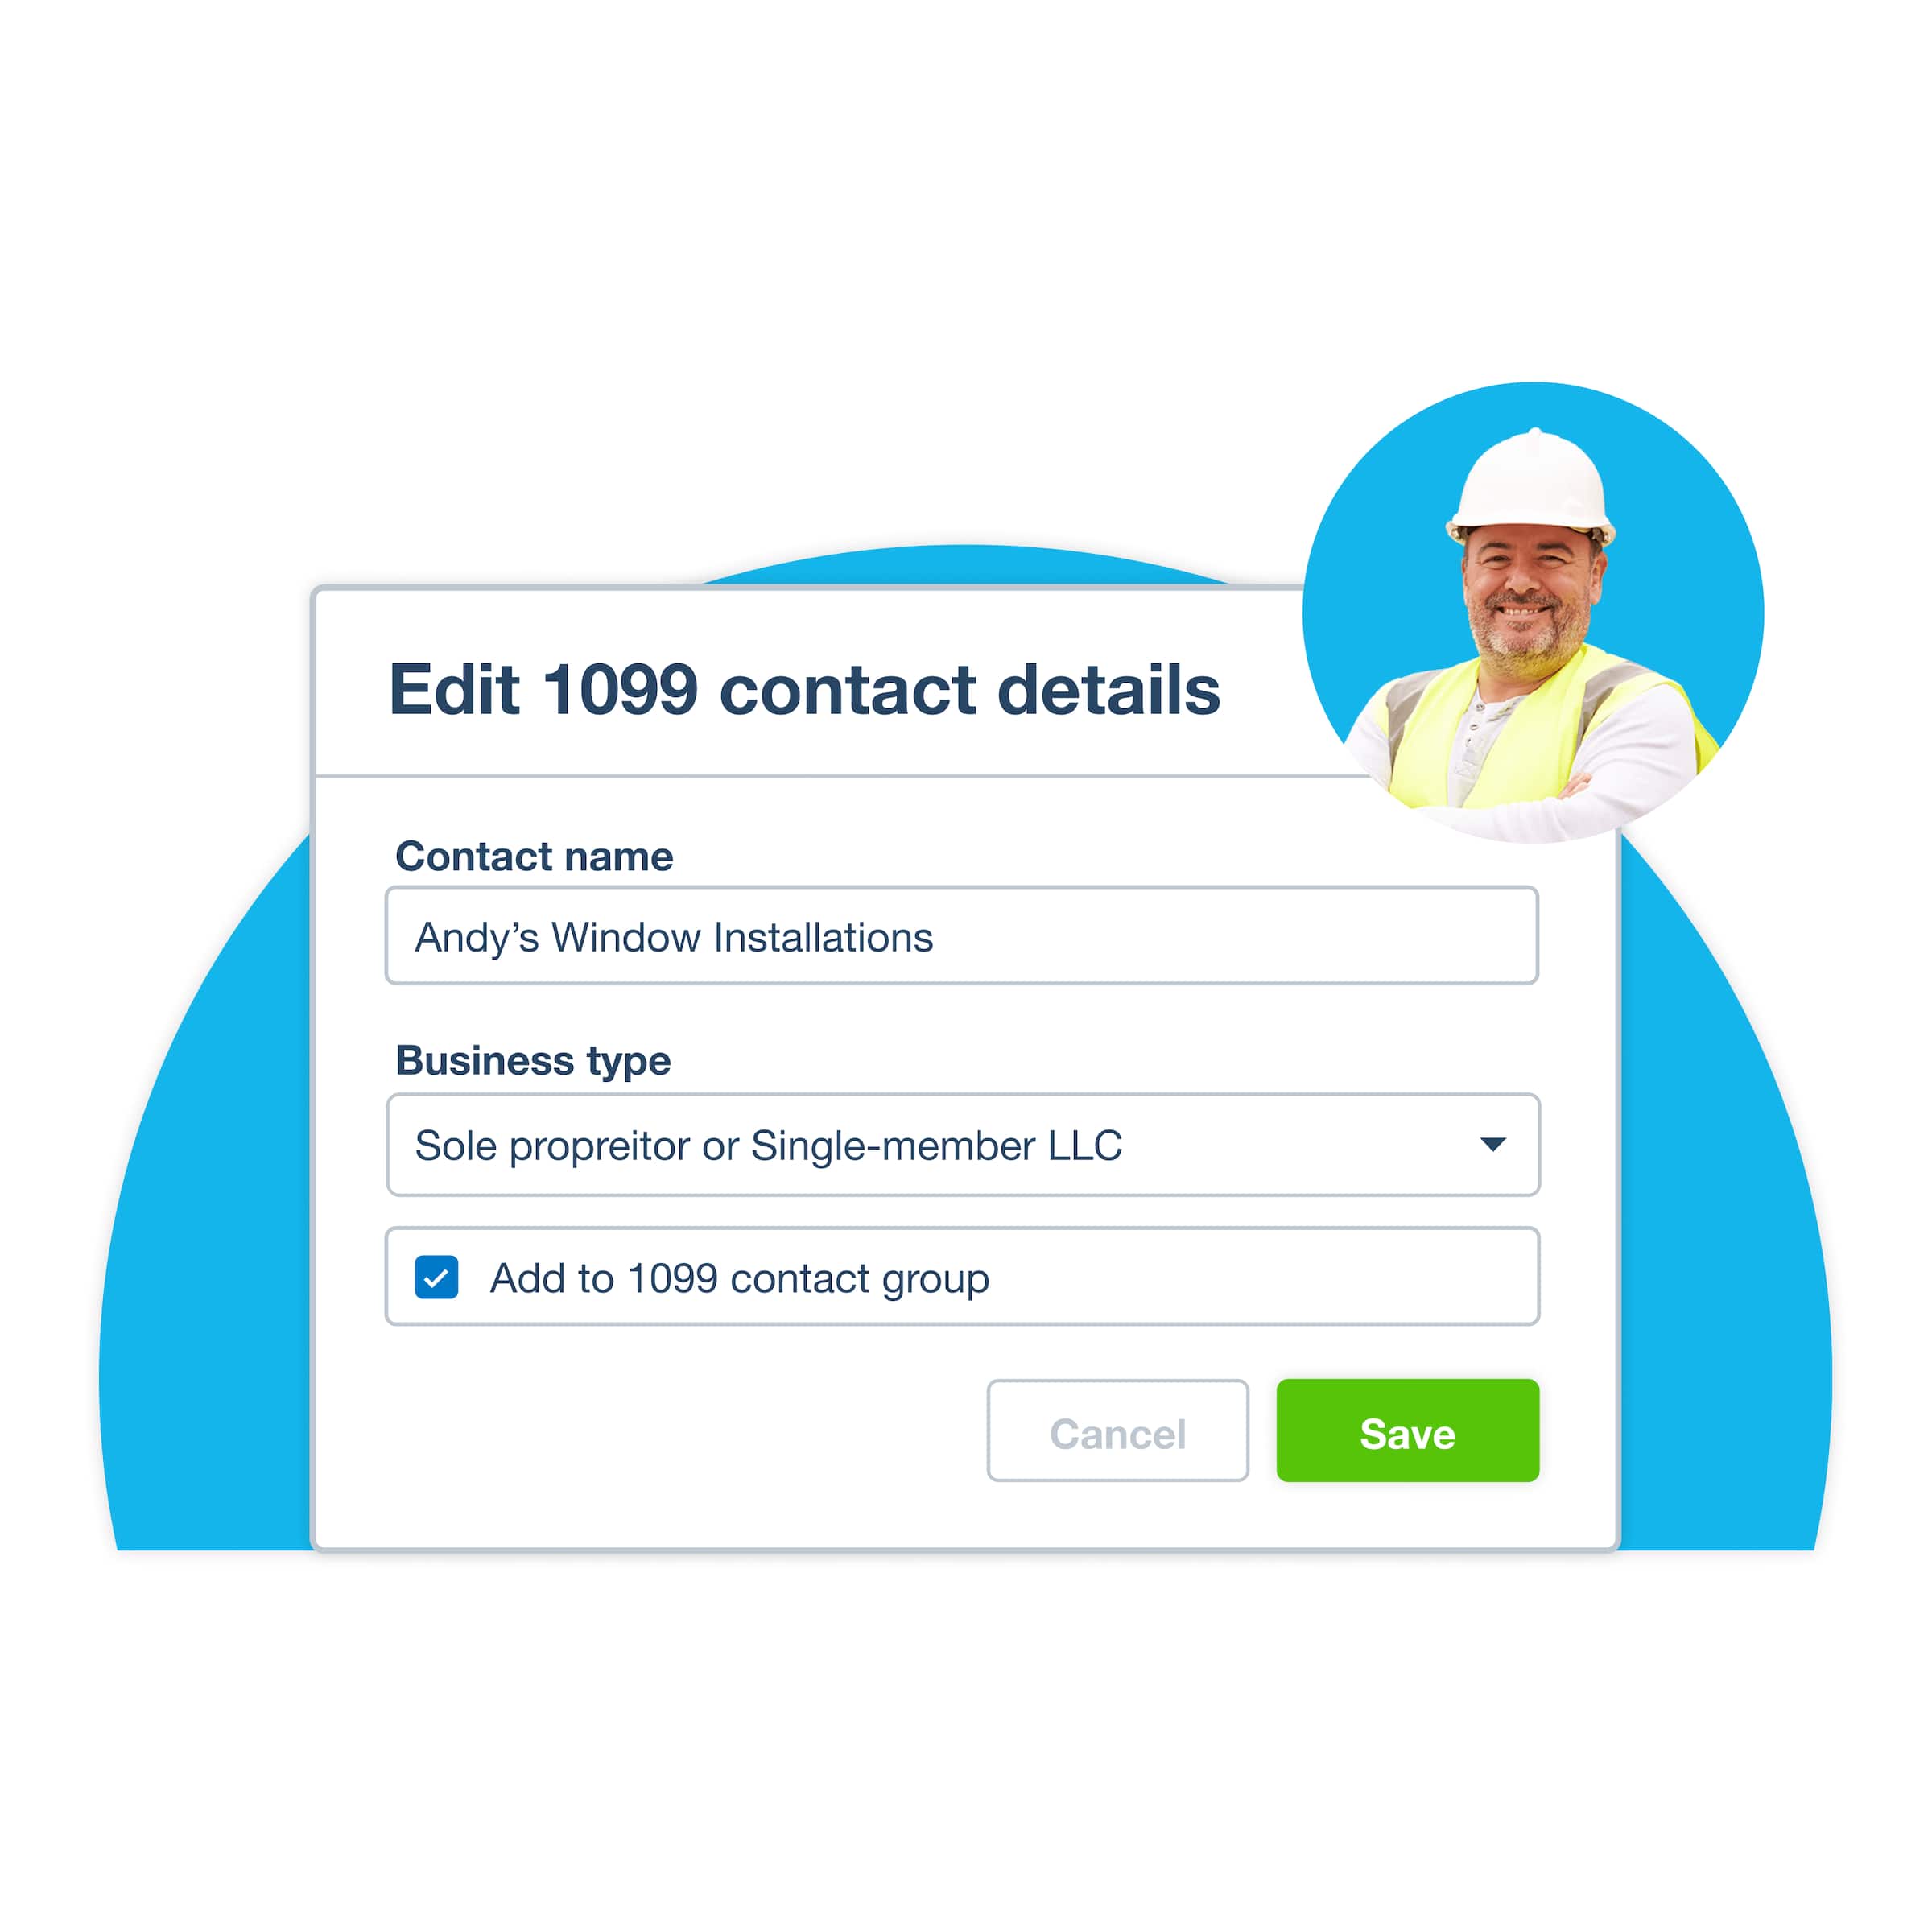 A builder uses the 1099 software in Xero to edit details of one of their job contacts online.